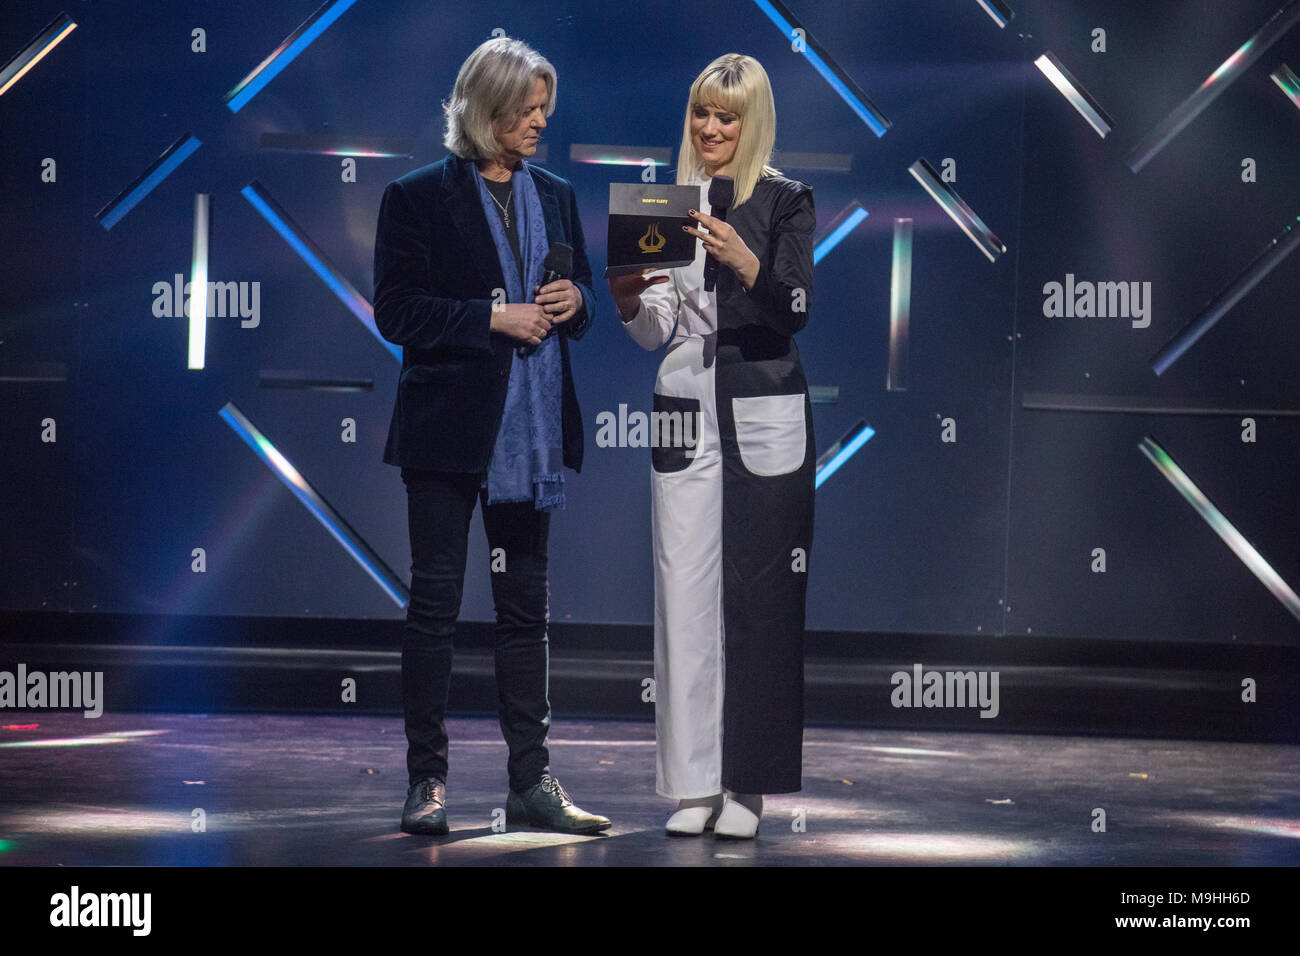 Norway, Oslo - February 25, 2018. The Norwegian singers Aslag Haugen and Dagny present an award during the Norwegian Grammy Awards, Spellemannprisen 2017, at Oslo Konserthus in Oslo. (Photo credit: Gonzales Photo - Stian S. Moller). Stock Photo